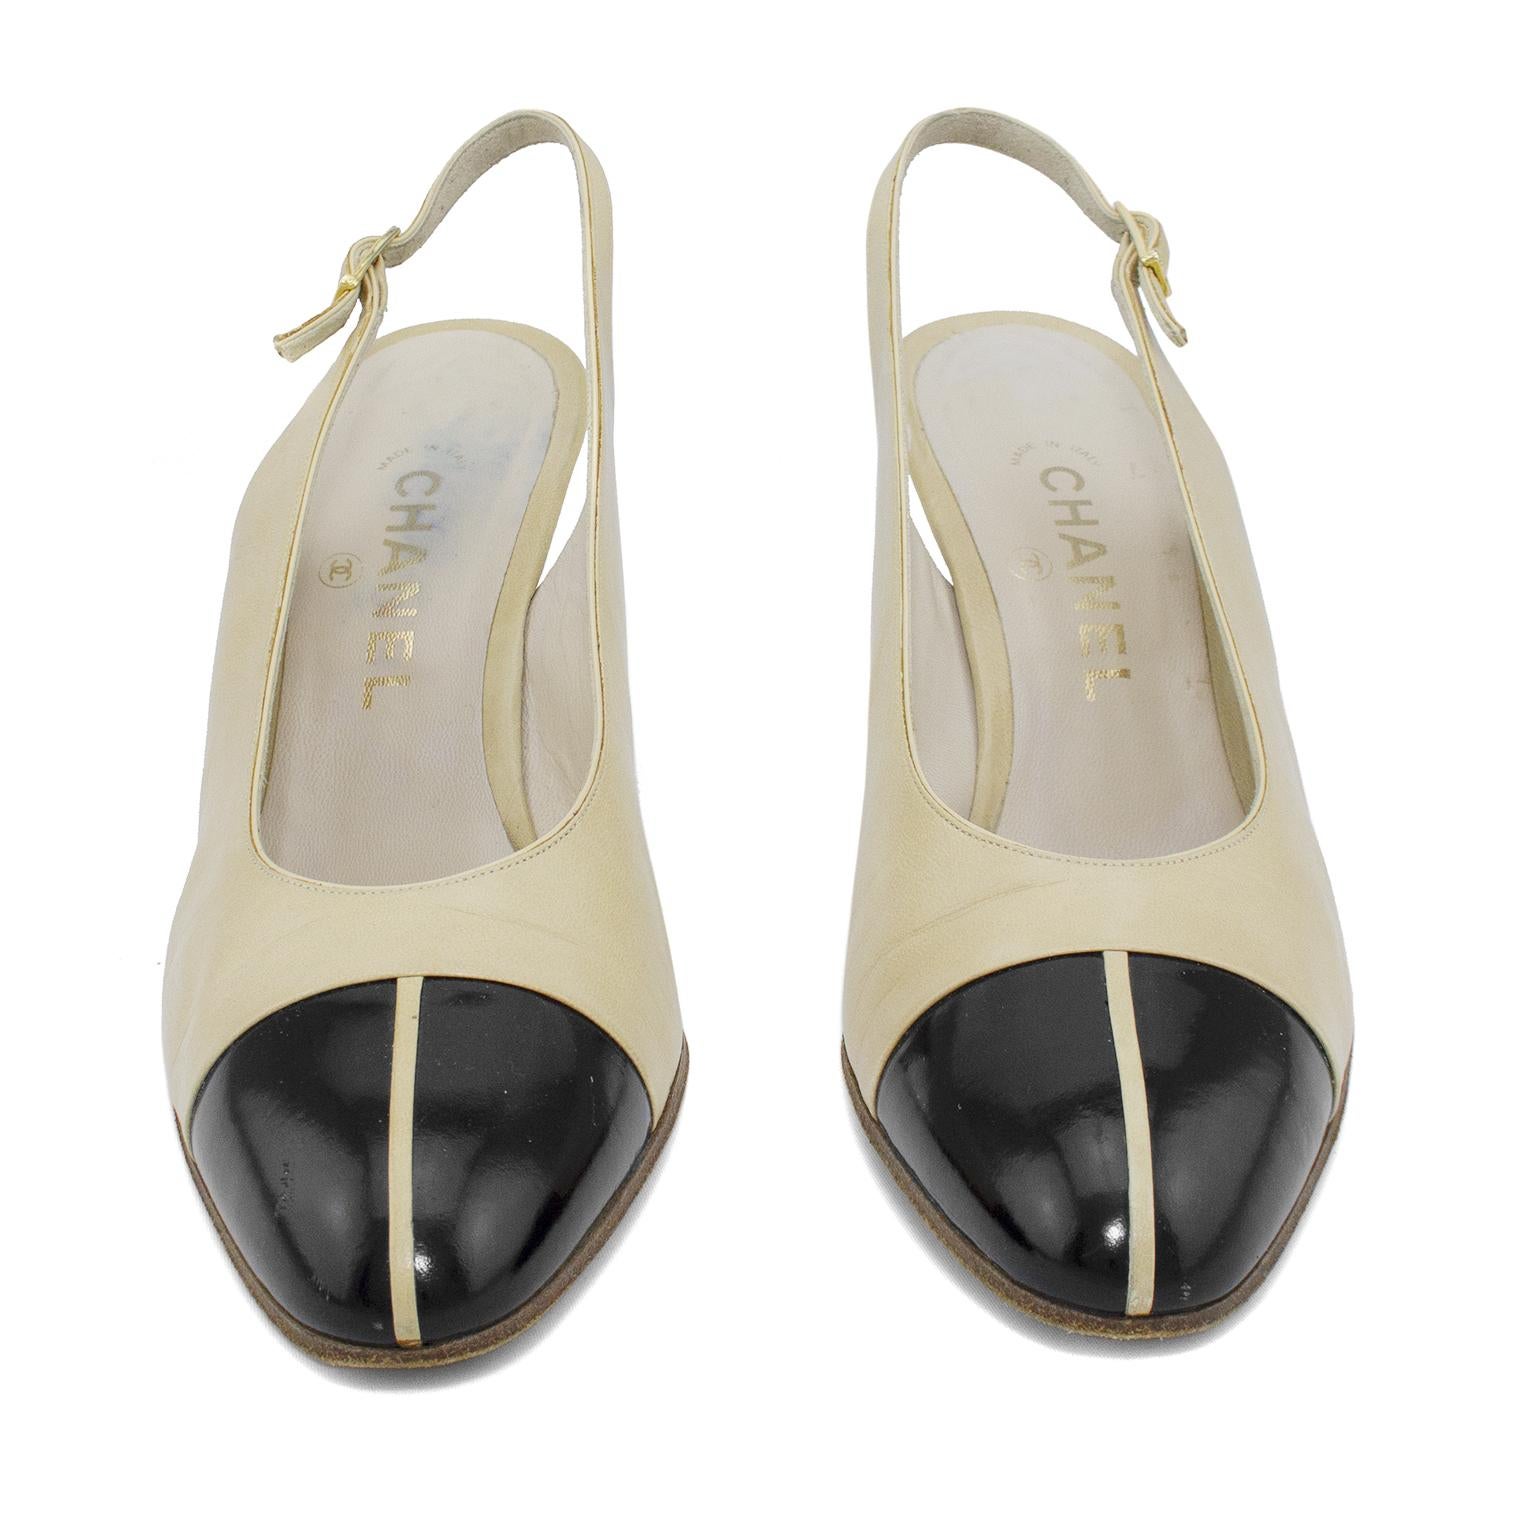 Chanel Early 1990s Beige and Black Slingbacks  In Good Condition For Sale In Toronto, Ontario